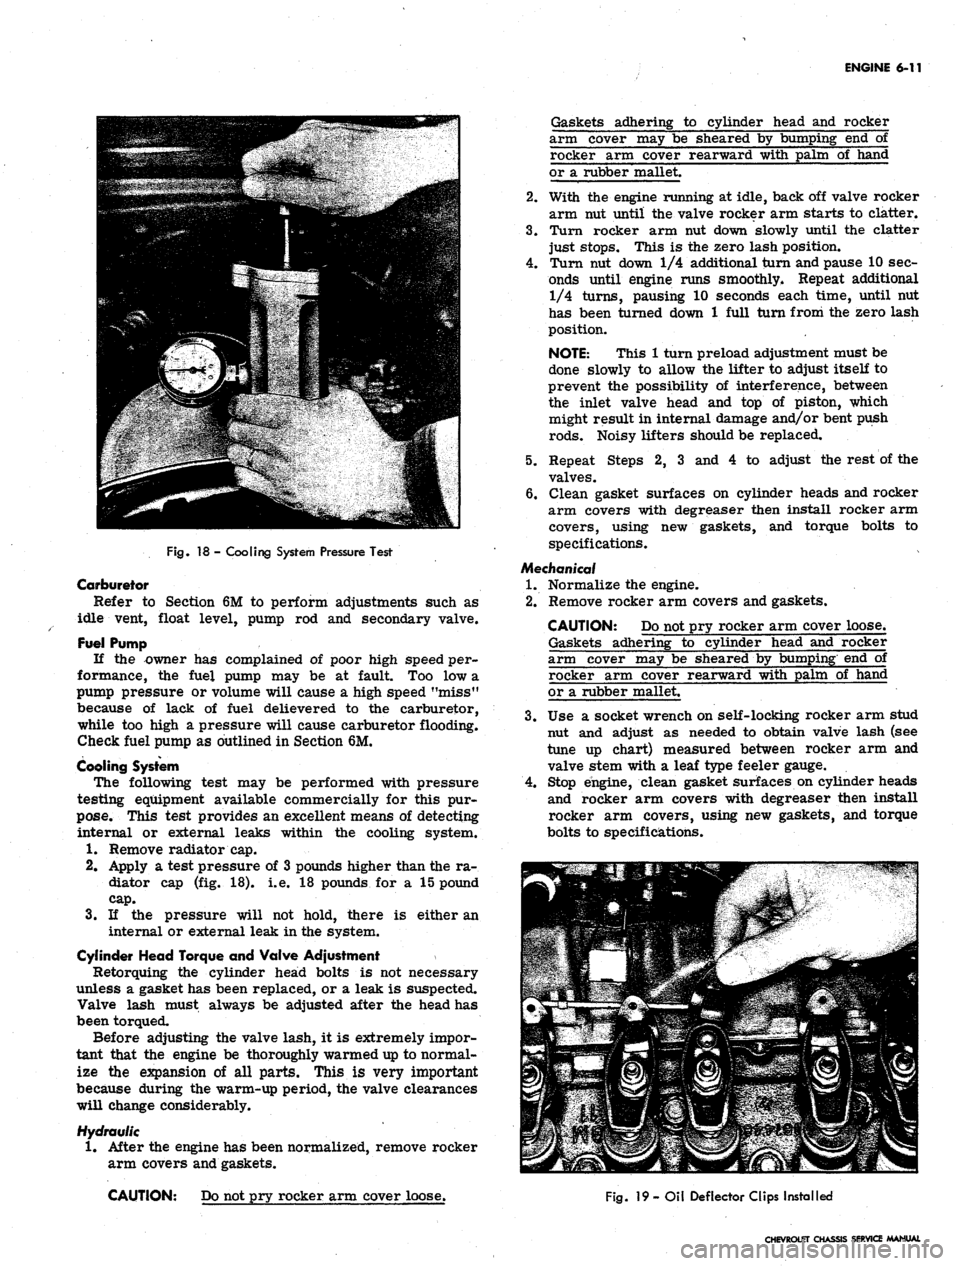 CHEVROLET CAMARO 1967 1.G Chassis Manual PDF 
ENGINE 6-11

Fig.
 18 - Cooling System Pressure Test

Carburetor

Refer to Section 6M to perform adjustments such as

idle vent, float level, pump rod and secondary valve.

Fuel Pump

If the owner ha